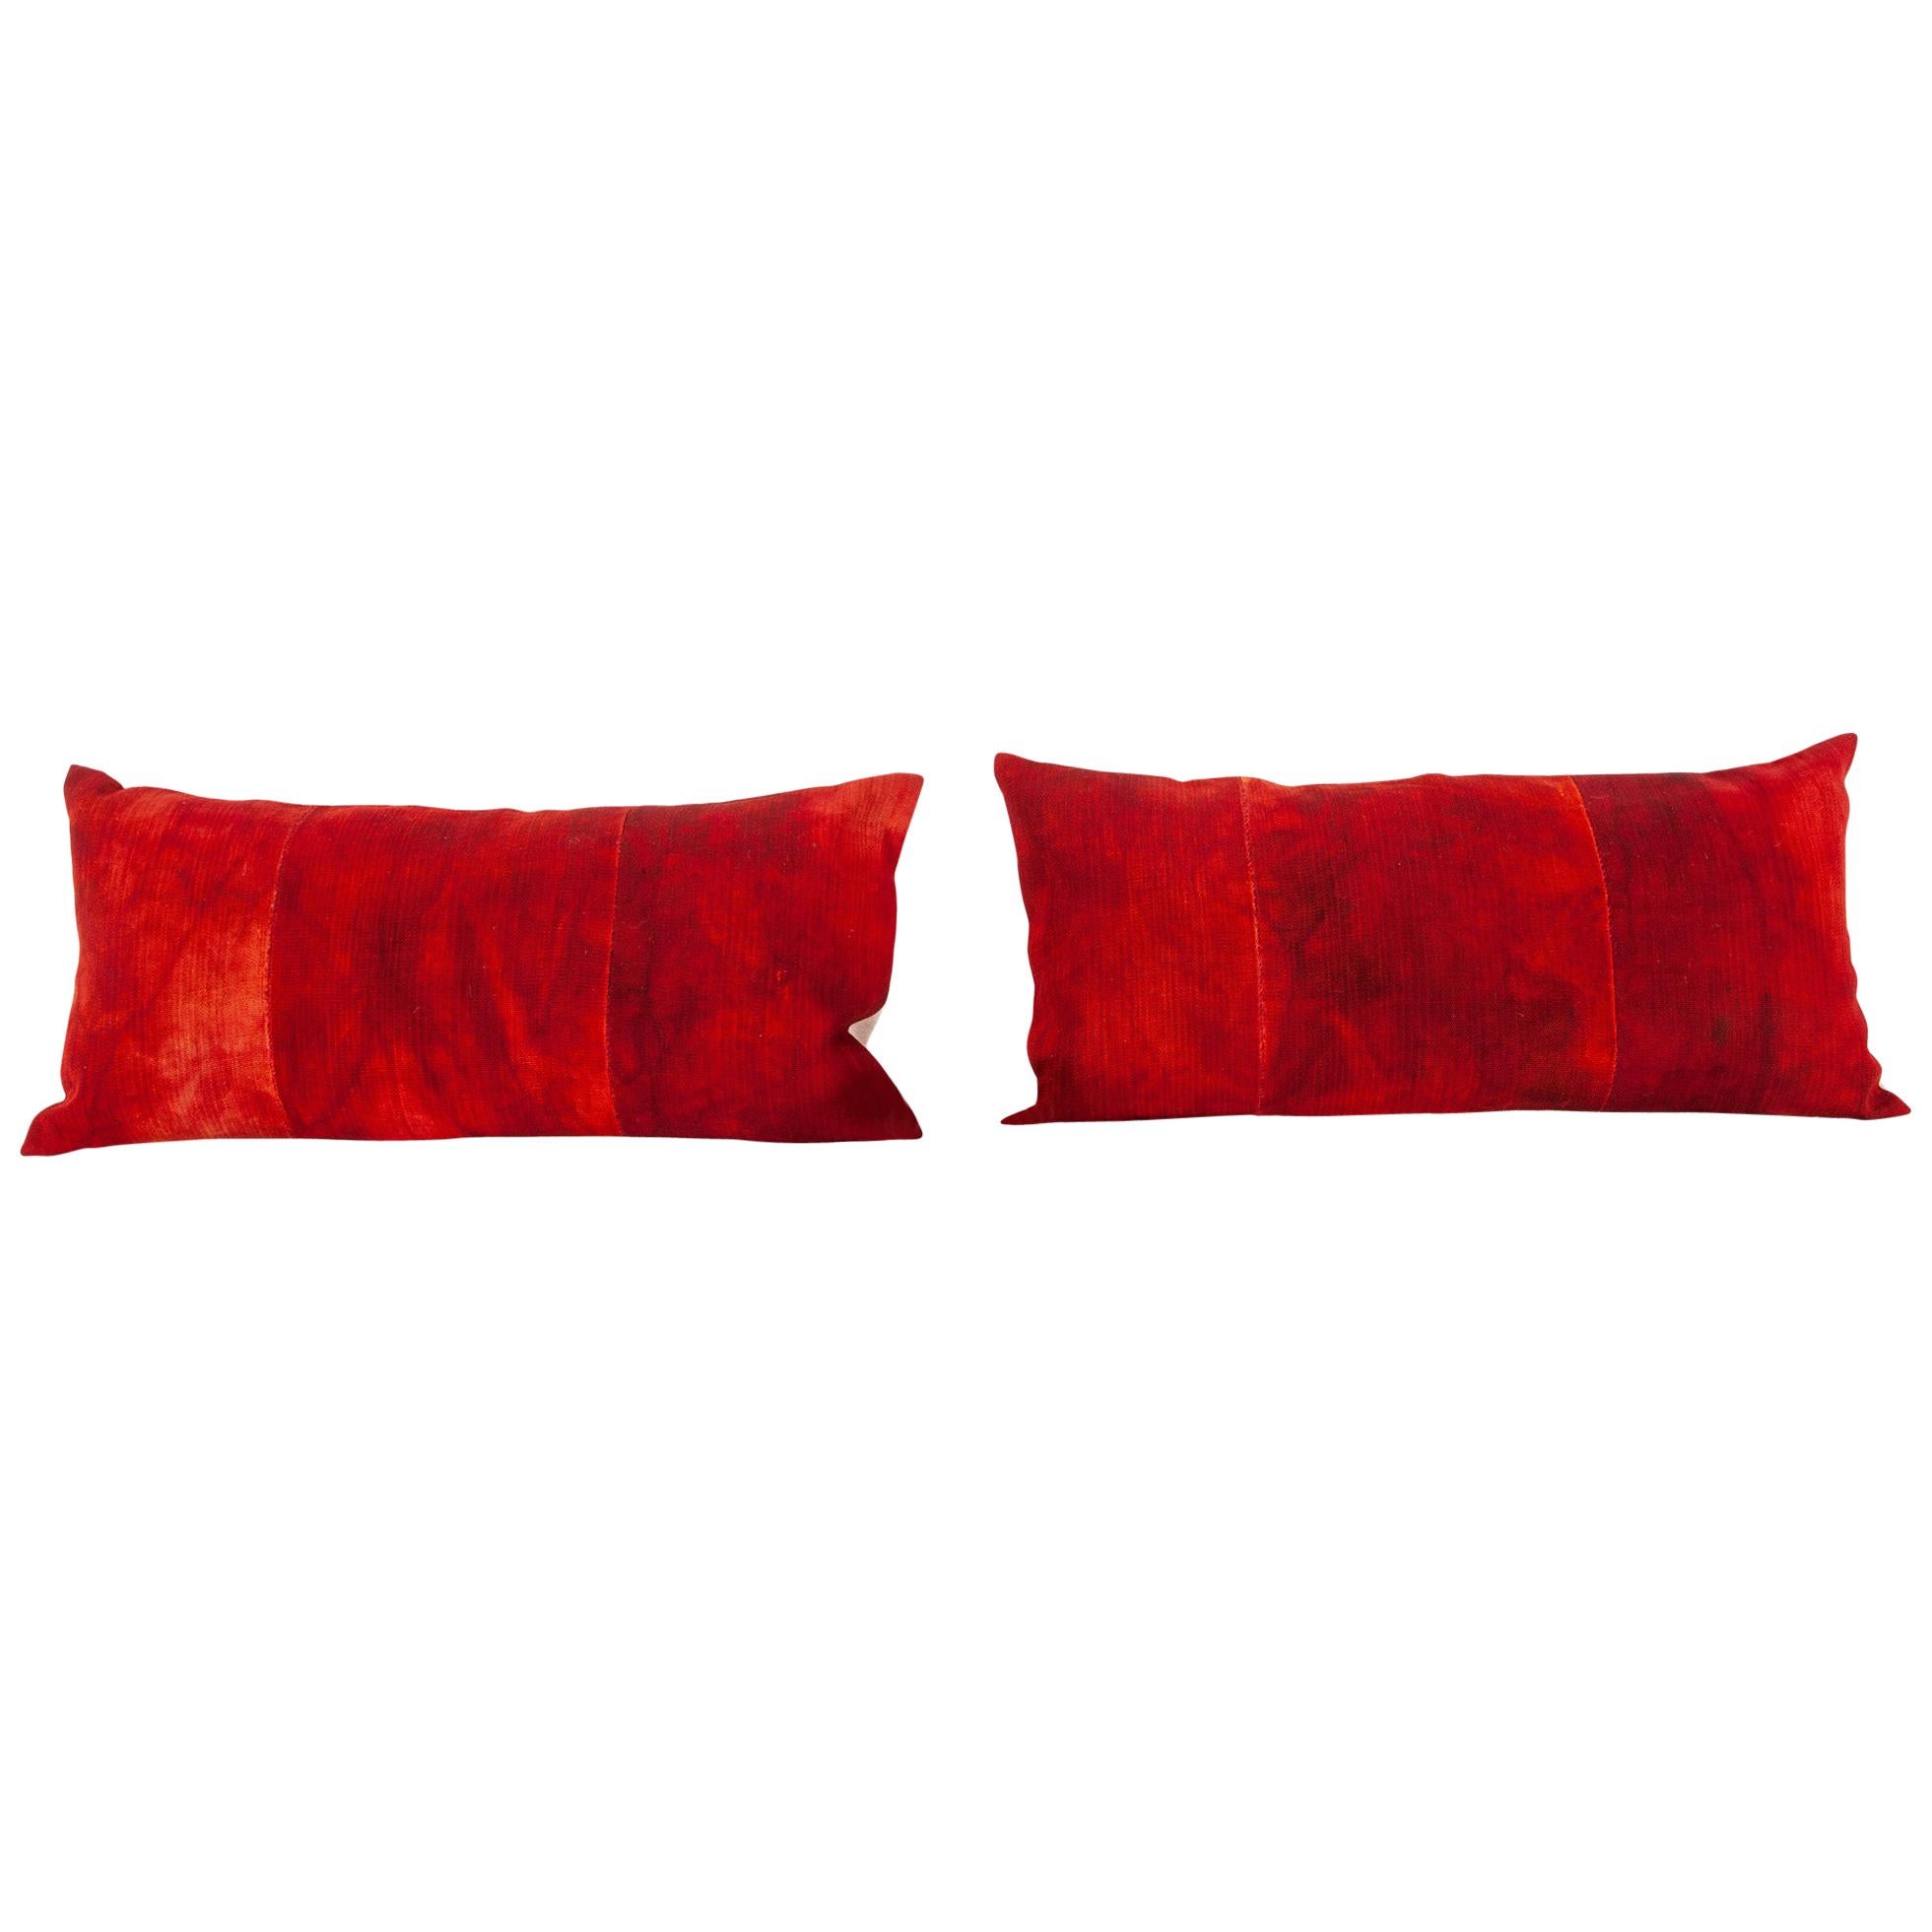 Pillow Cases Fashioned from a Mid-20th Century Anatolian Parde / Cover